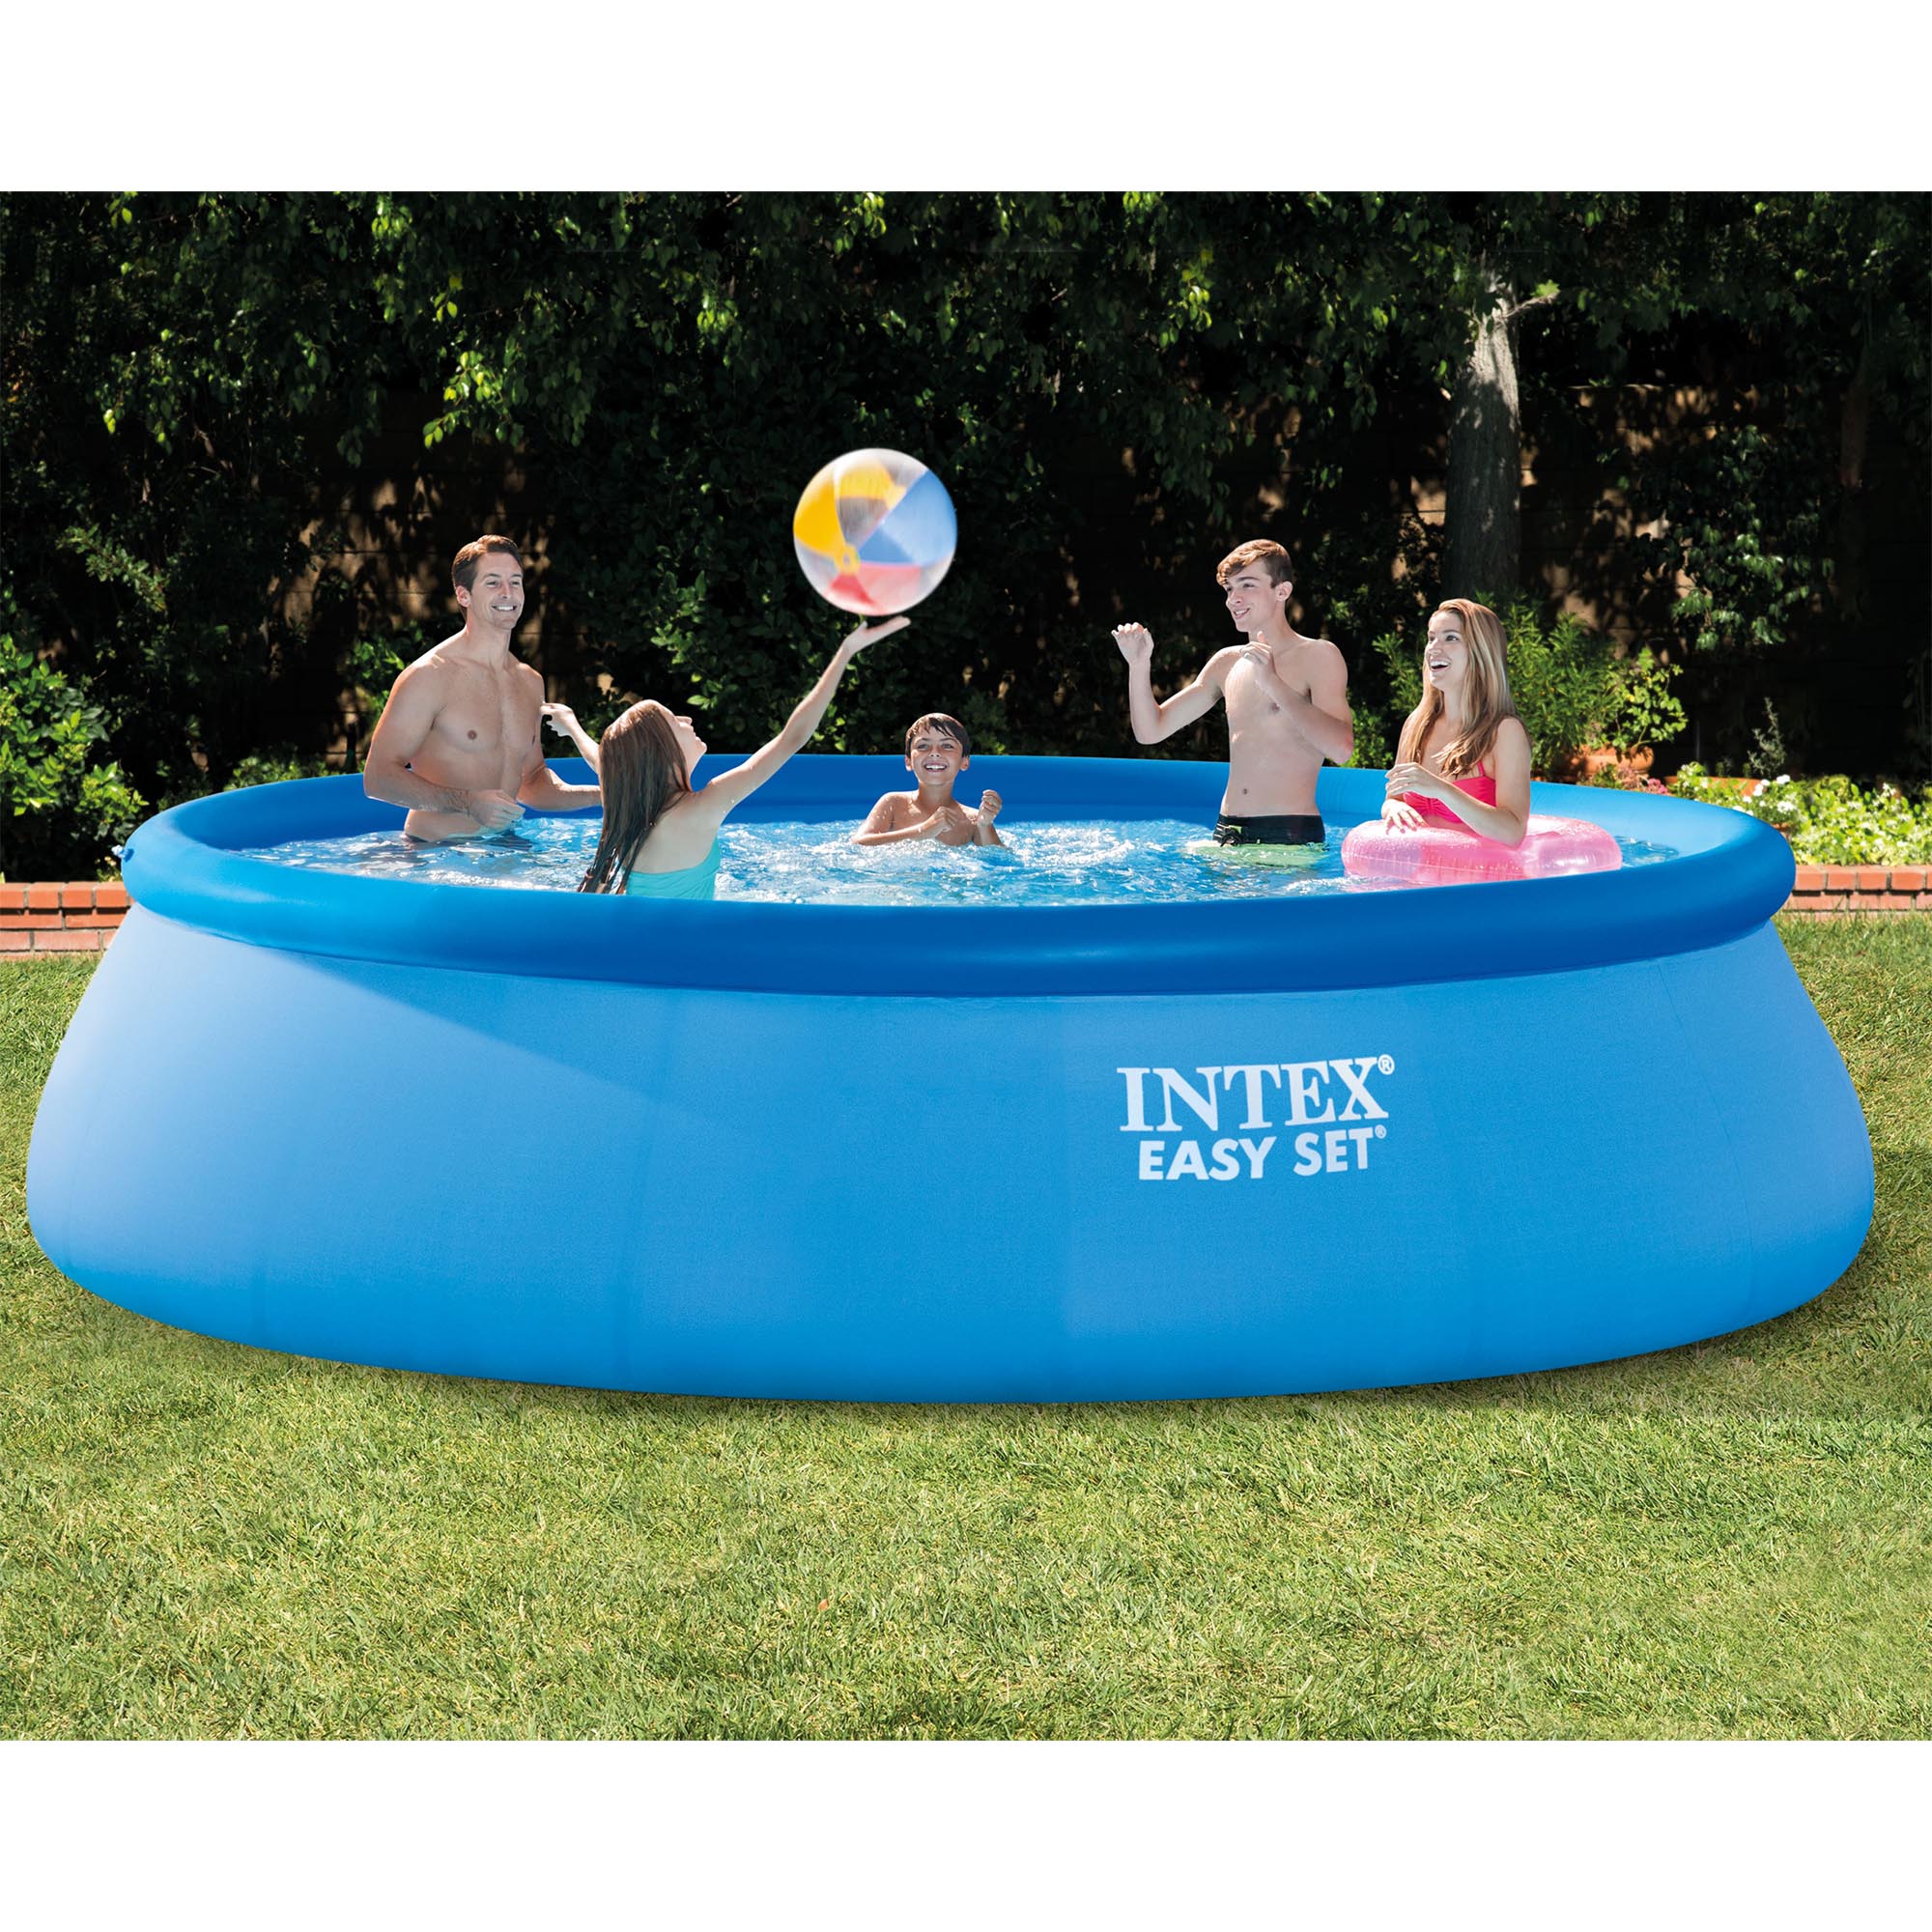 Inflatable Pool GreatGiftList 15ft Quick Set Inflatable Above Ground Swimming Pool Kiddie Pools Kids Outdoor Inflatable Swimming Pool 